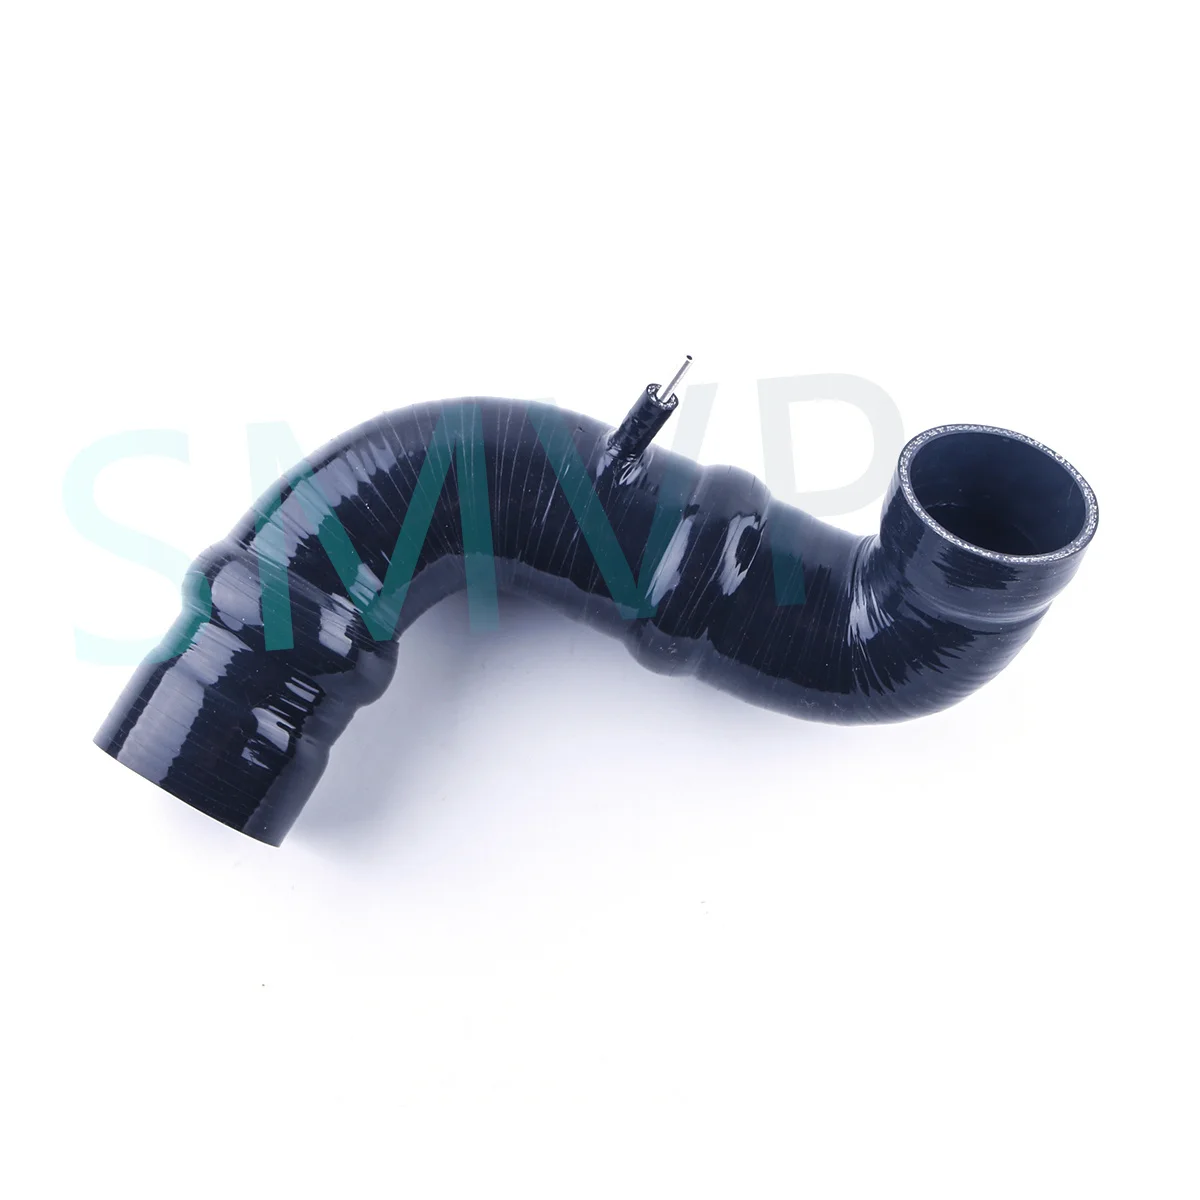 Купи Silicone Intake Hose Air Cleaner Filter Hose Fit For 2003-2008 SAAB 9-3 93 Replacement Performance Parts 2004 2005 2006 2007 за 2,760 рублей в магазине AliExpress